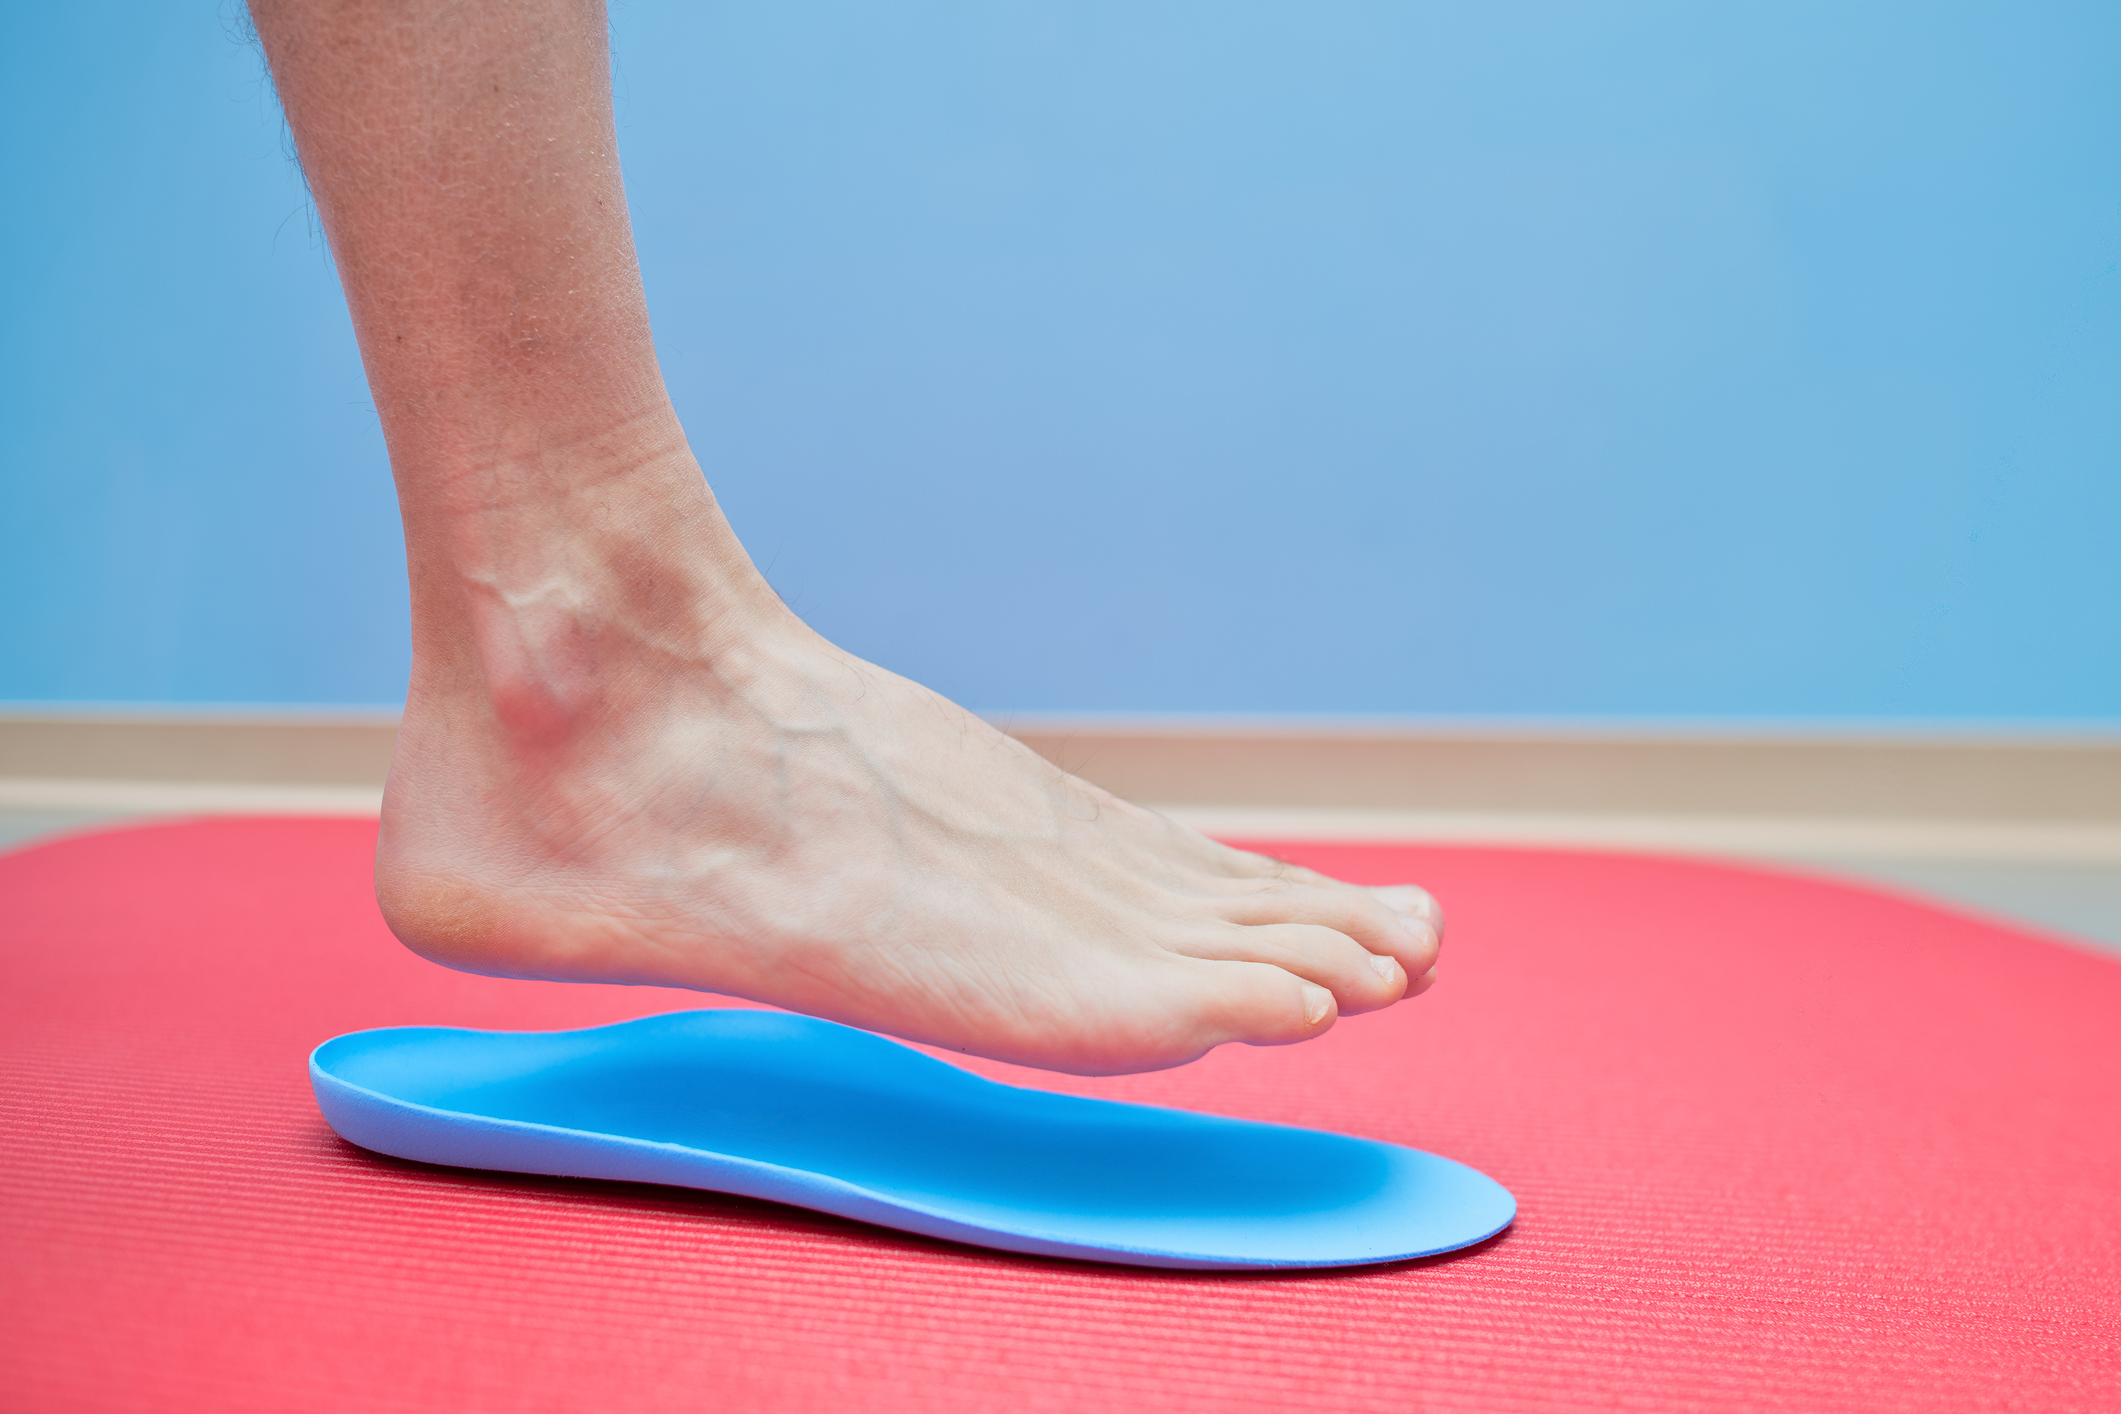 Orthotics or Insoles: Decide Which are Best for You